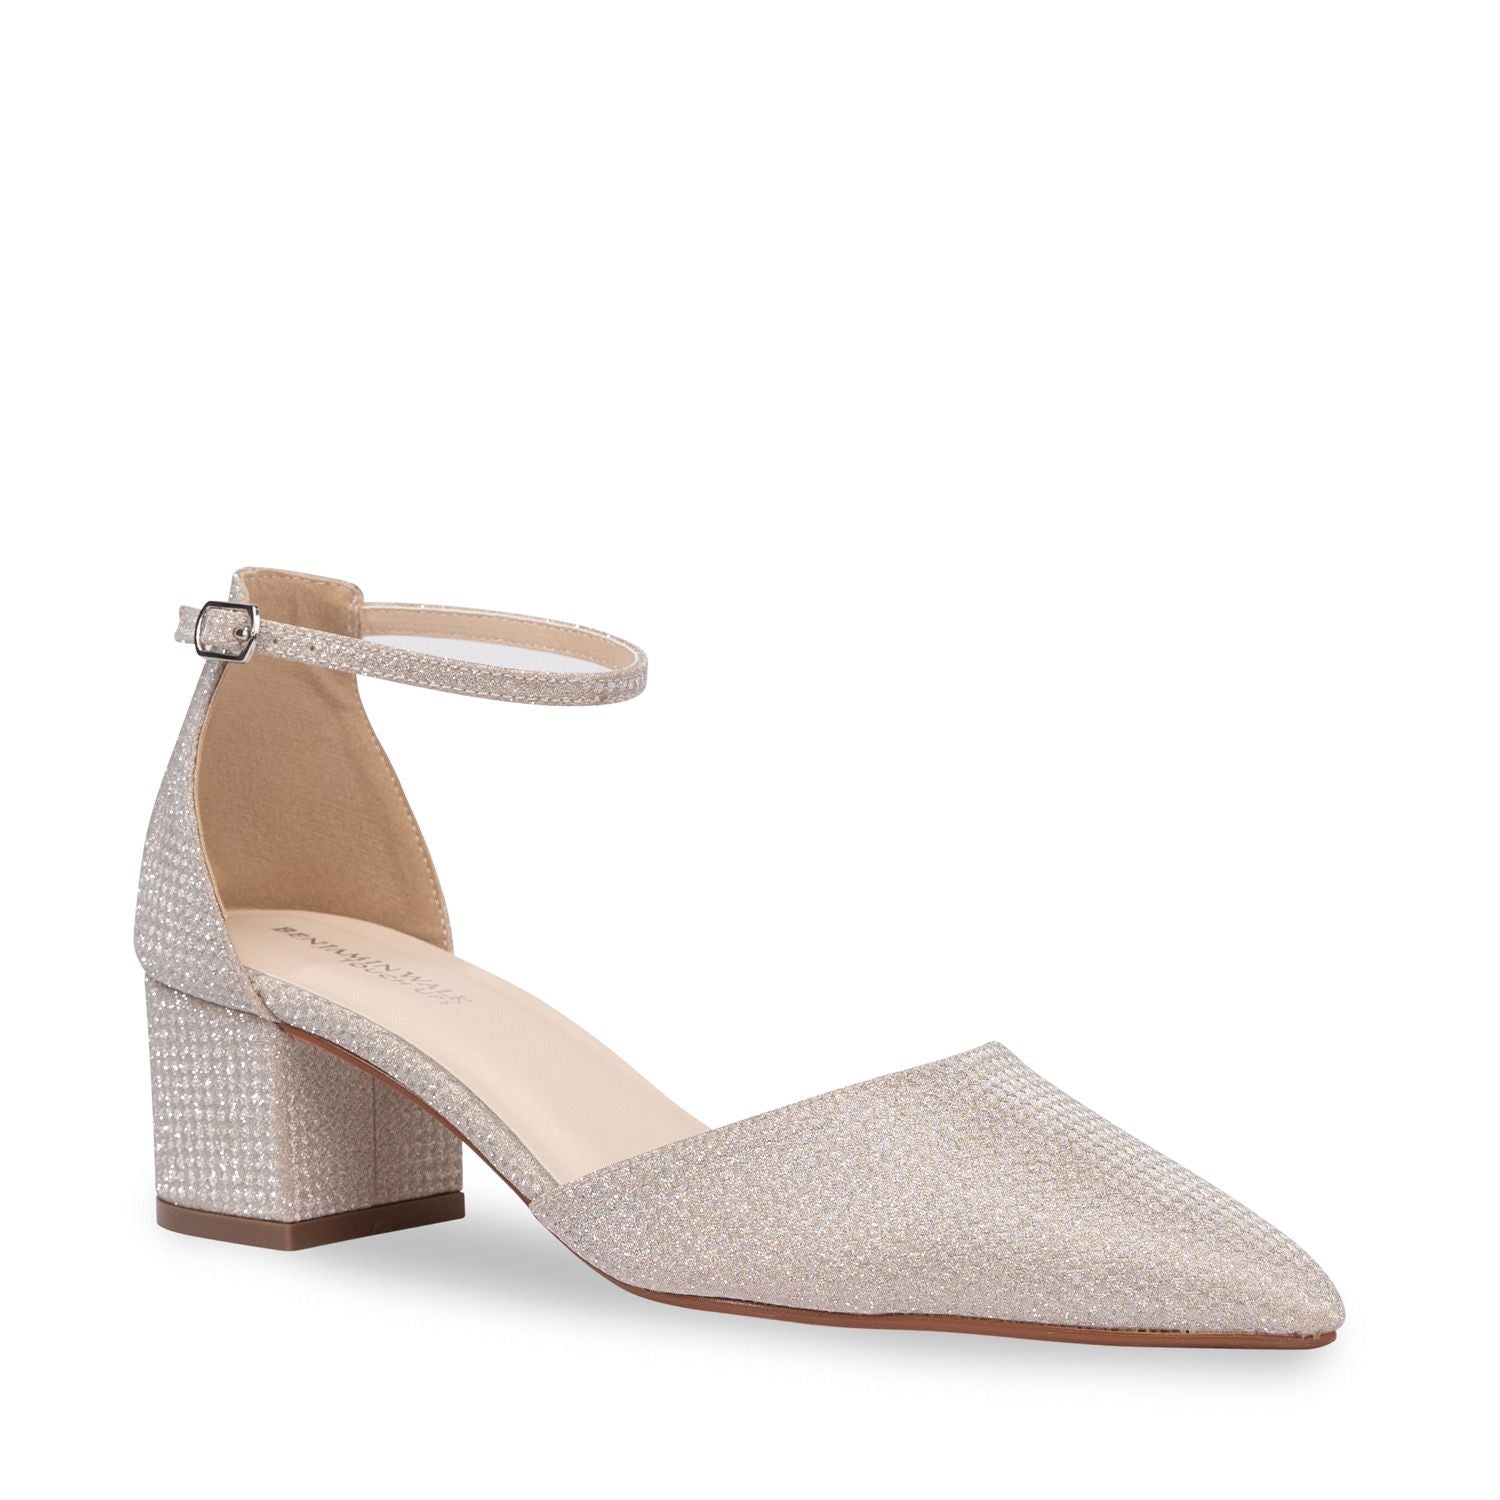 Closed toe Champagne shimmer shoe with 1.75 inch block heel